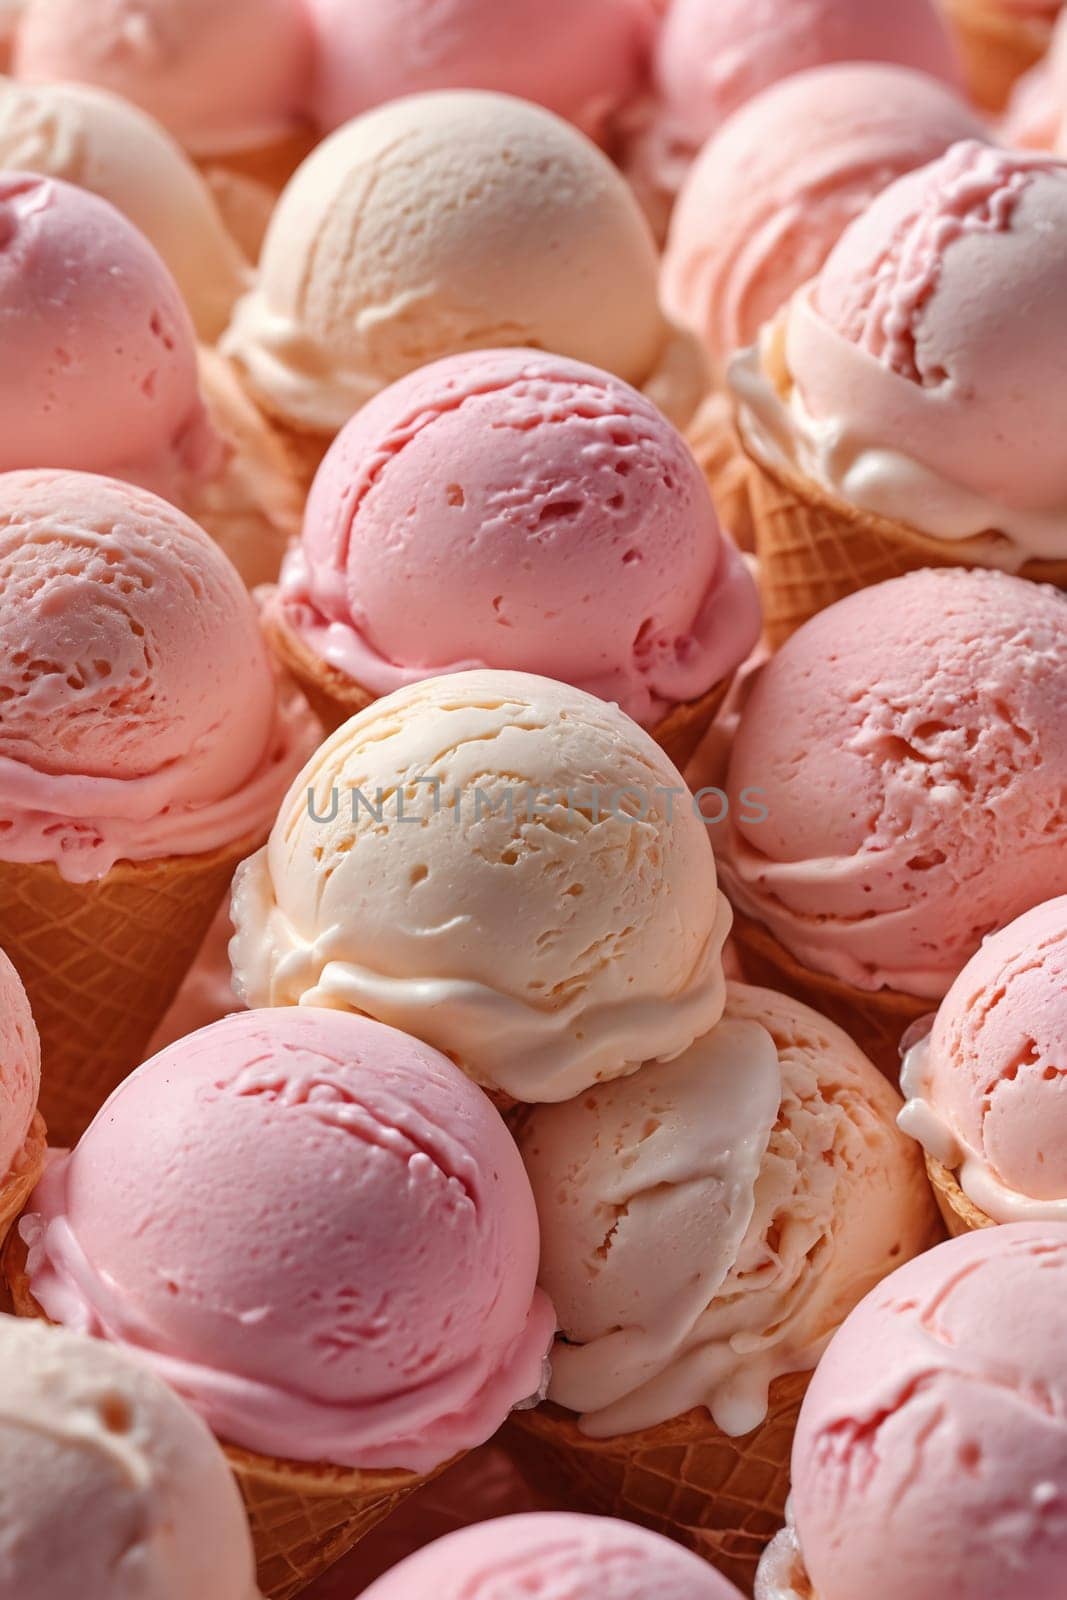 Delight in summer with these three delicious ice cream cones.